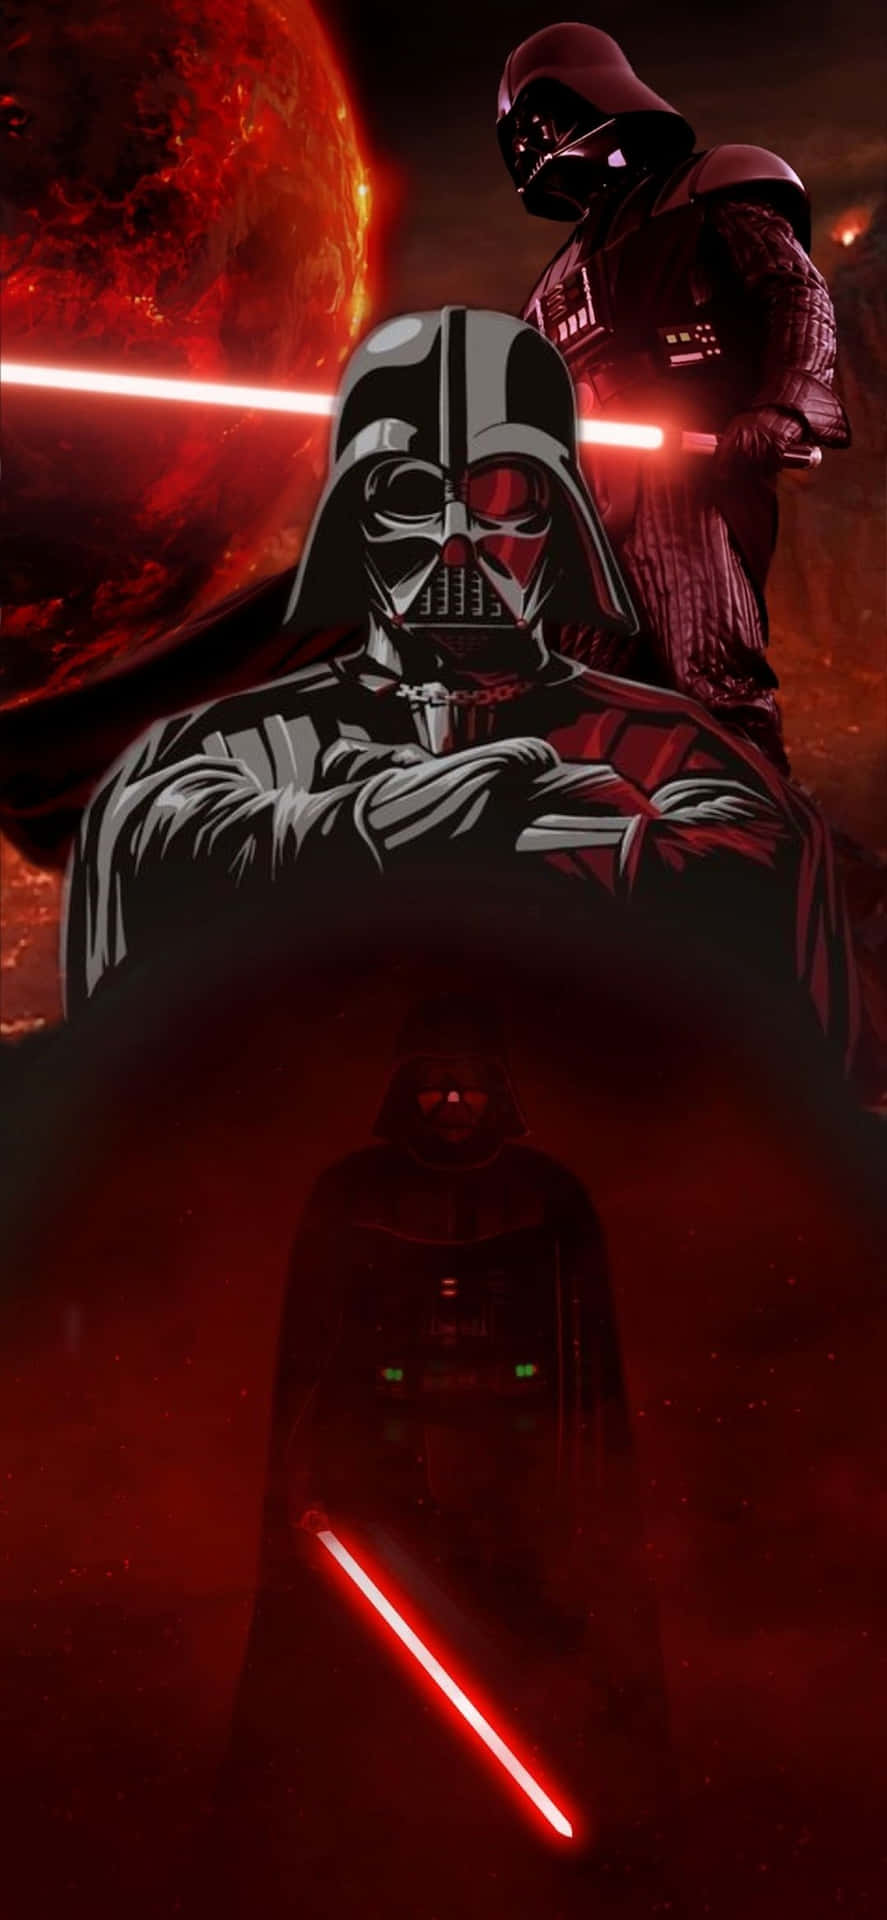 Don't Wait - Get The iPad Pro With Darth Vader's Powerful Design Wallpaper